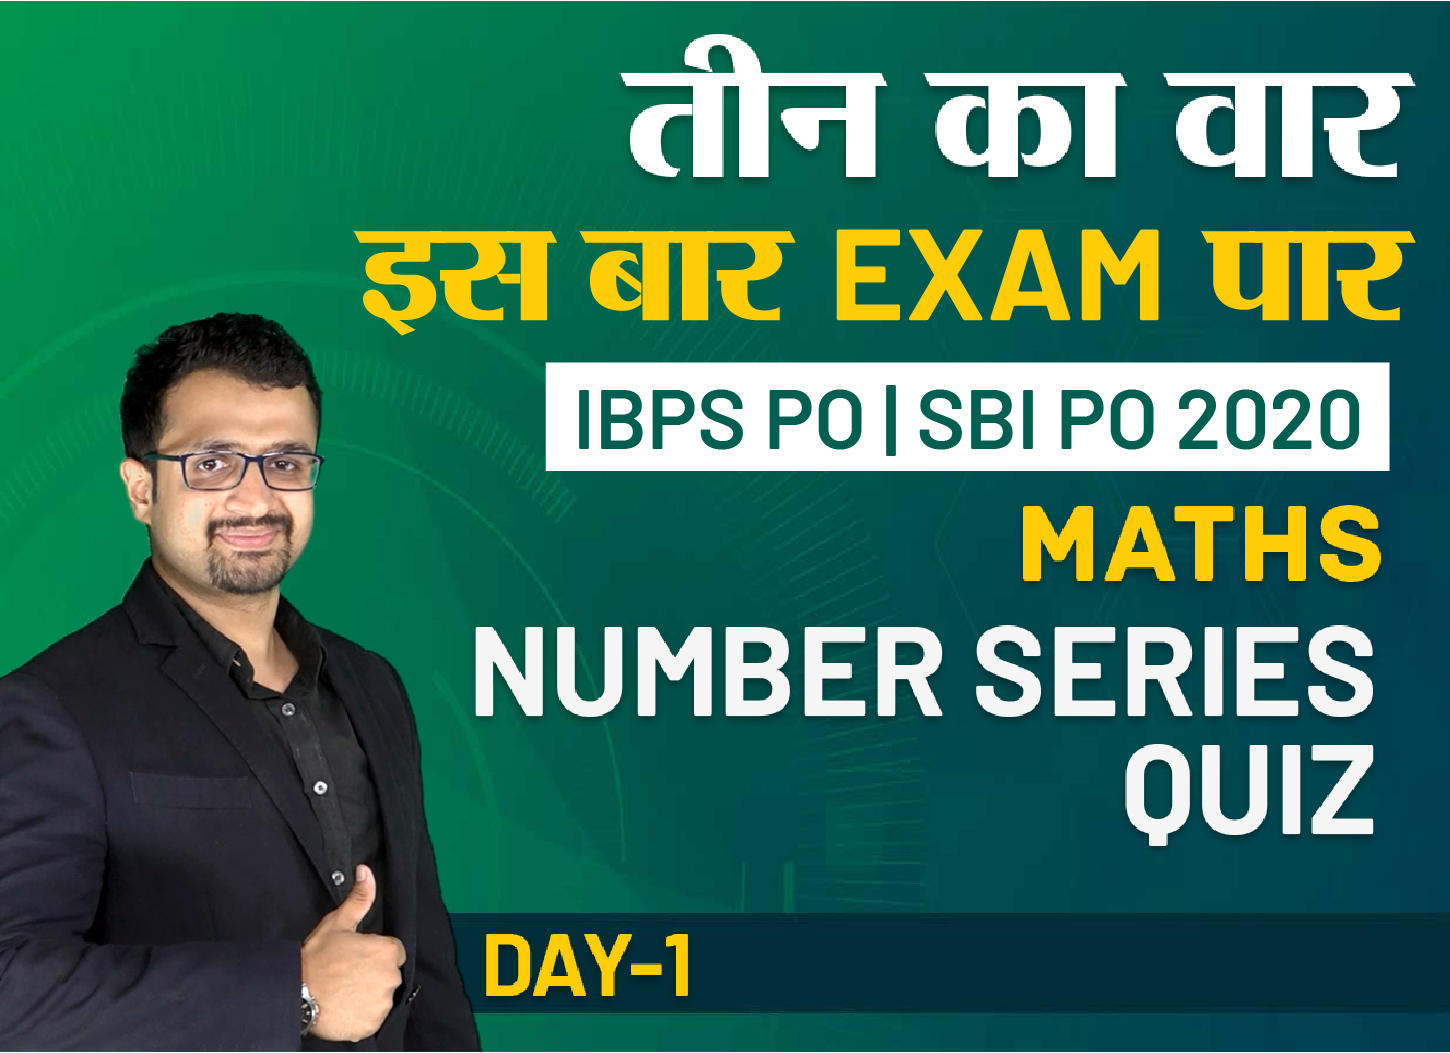 Sumit Sir is Live now with "Number series Quiz" for Maths!_40.1